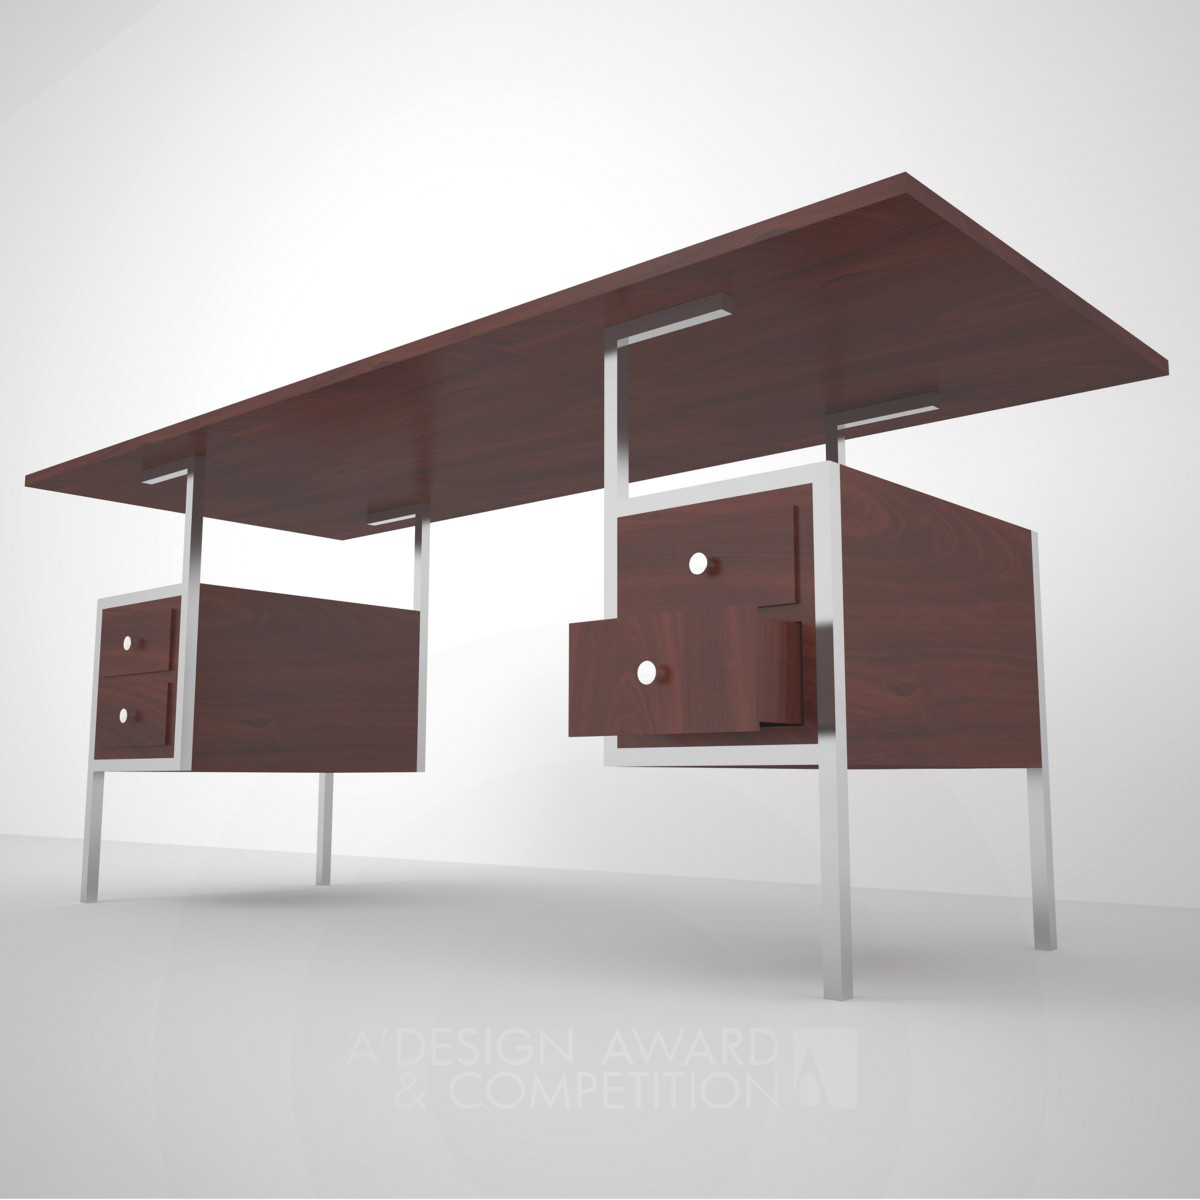 Good home and office furniture Design